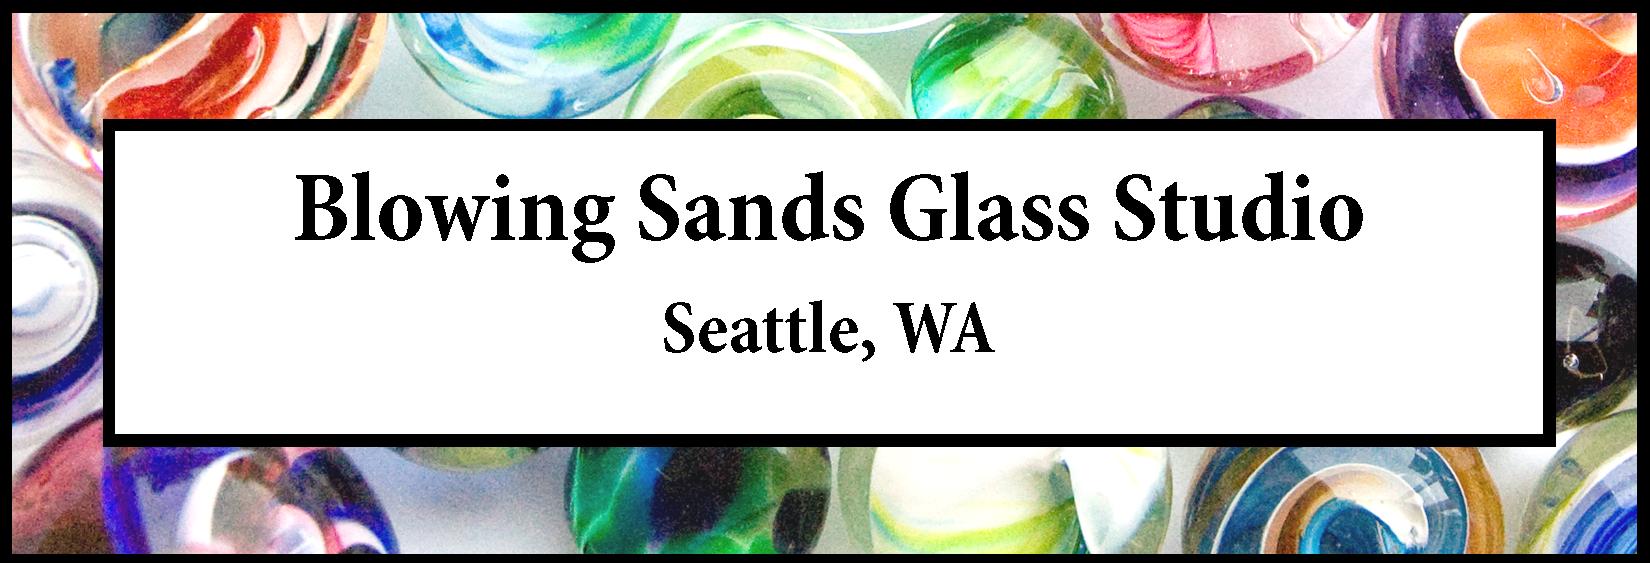 blowing sands glass